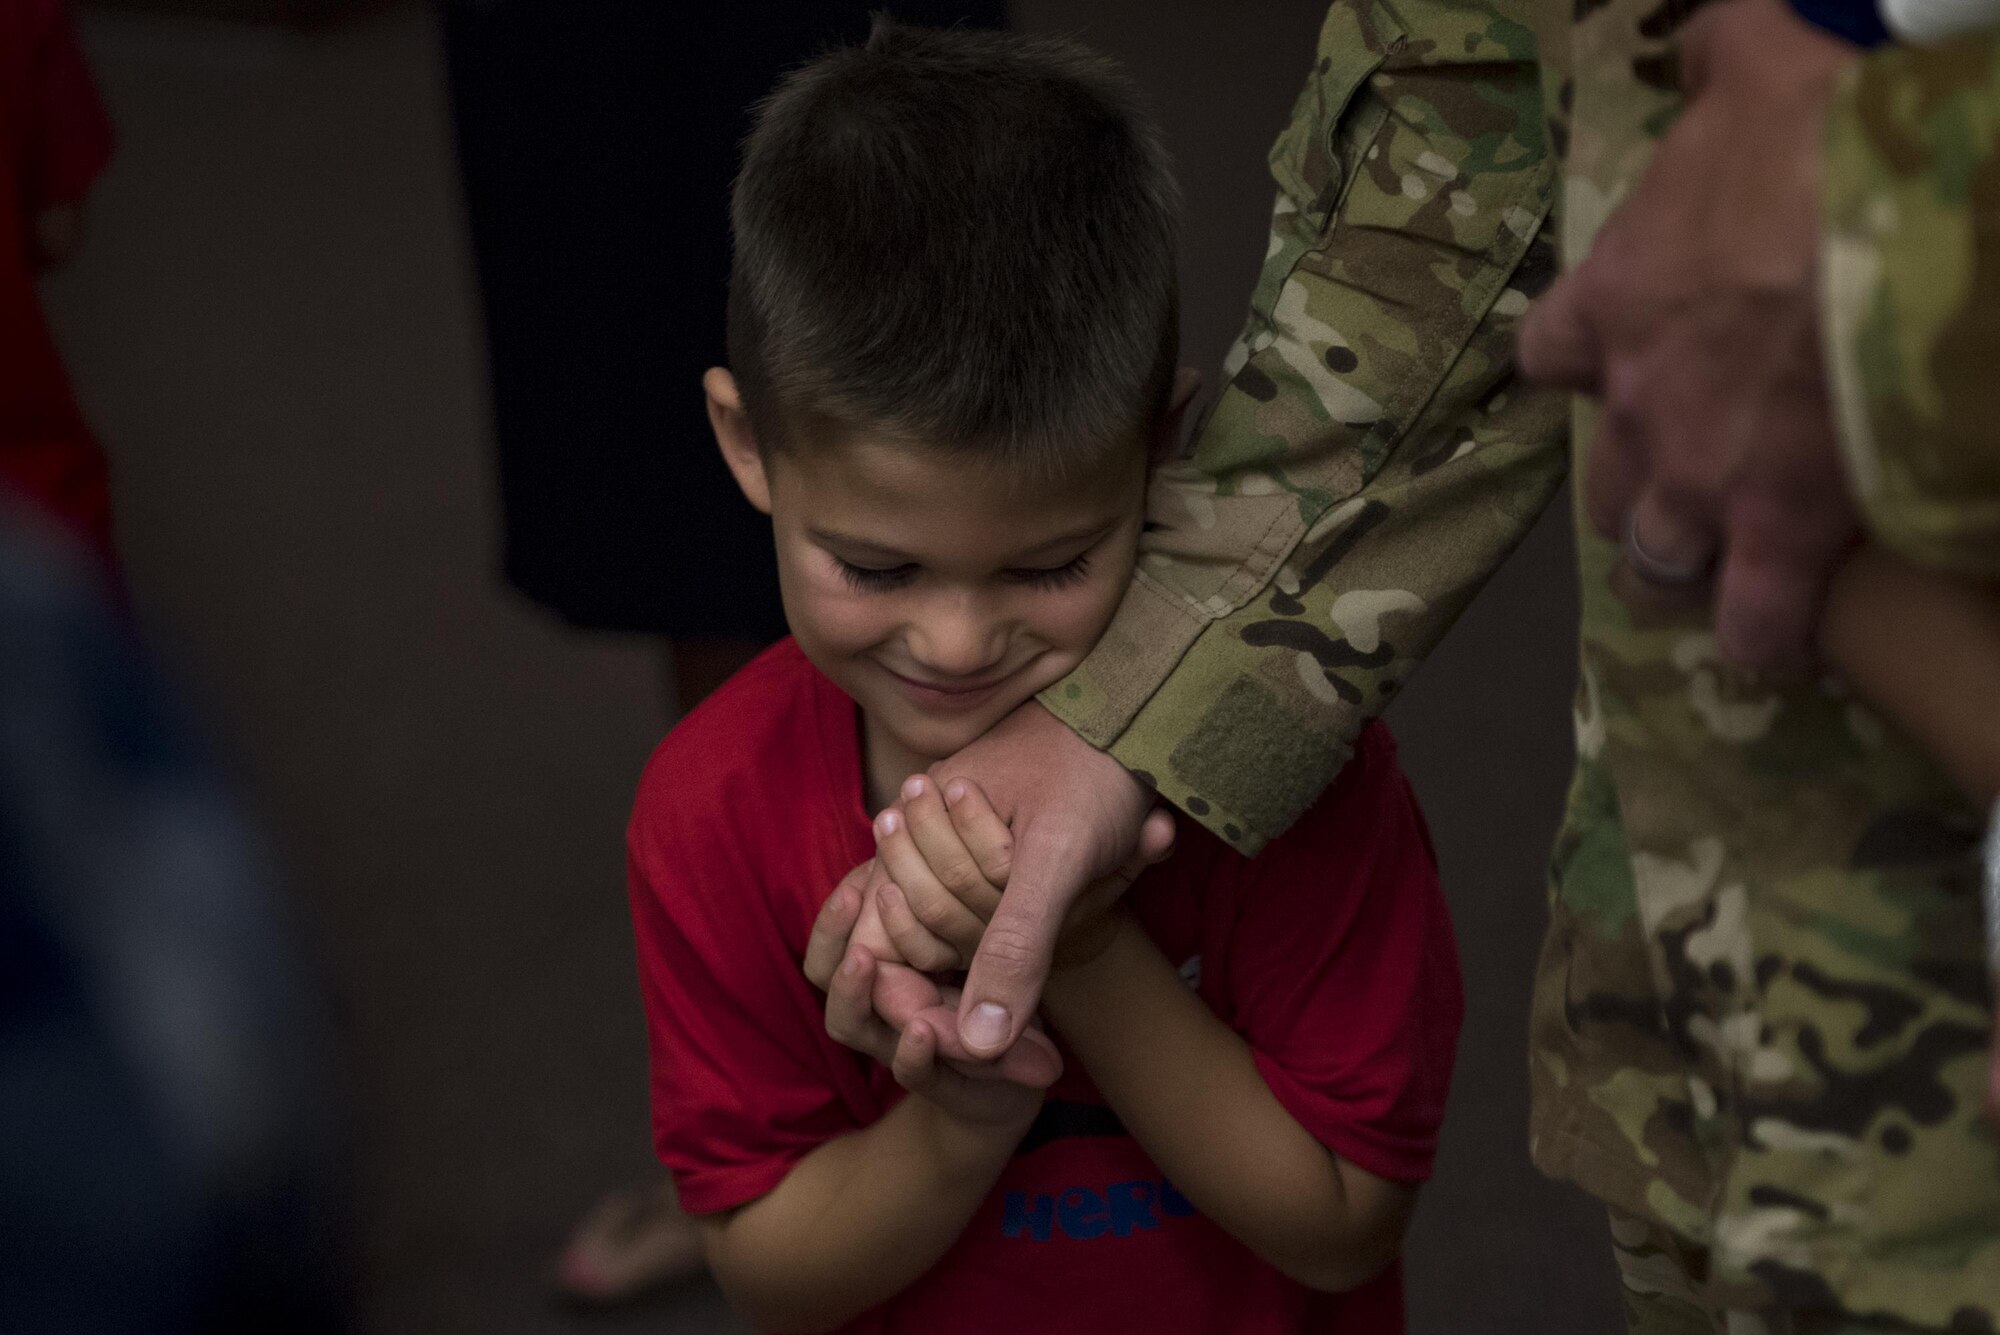 Luke Rynbrandt, holds the hand of his father, Capt. Kevin Rynbrandt, 41st Rescue Squadron HH-60G Pave Hawk pilot, as he returned home from a deployment, June 8, 2017, at Moody Air Force Base, Ga. The 41st and 71st Rescue Squadrons were recently deployed to Southwest Asia where they provided combat search and rescue capabilities in support of Operation Inherent Resolve. (U.S. Air Force photo By Airman 1st Class Daniel Snider)